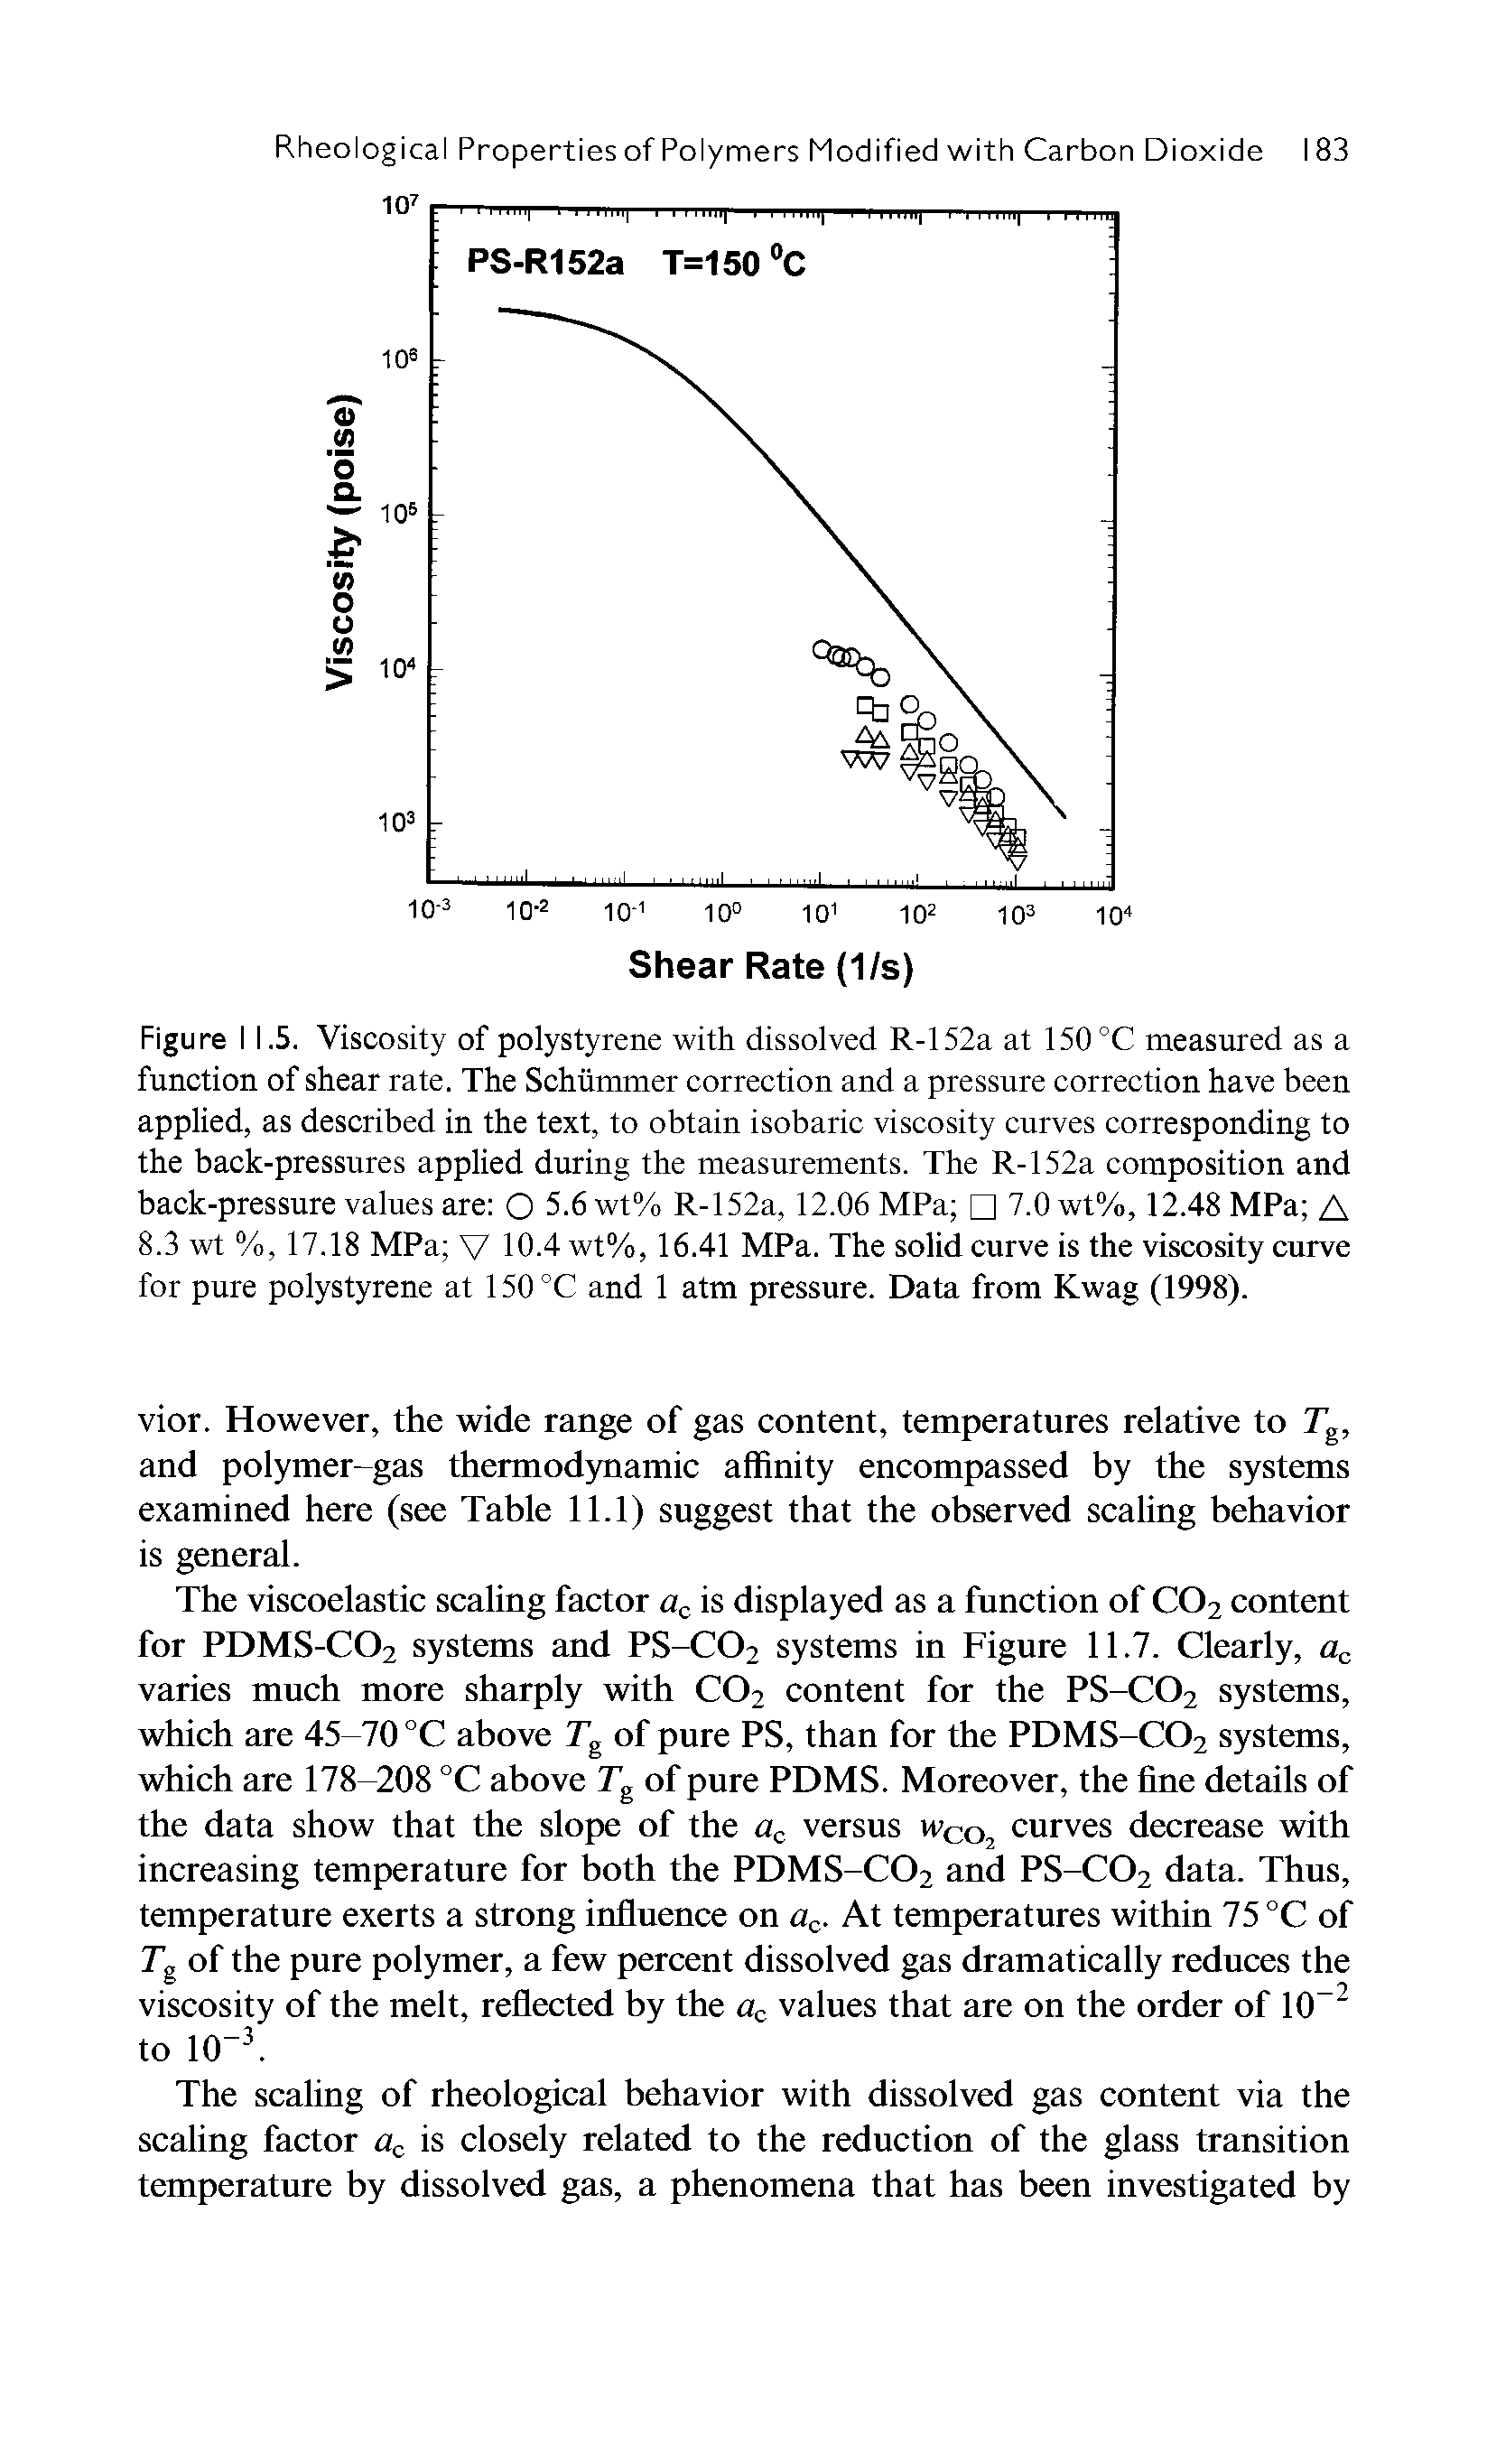 Figure I 1.5. Viscosity of polystyrene with dissolved R-152a at 150 °C measured as a function of shear rate. The Schummer correction and a pressure correction have been applied, as described in the text, to obtain isobaric viscosity curves corresponding to the back-pressures applied during the measurements. The R-152a composition and back-pressure values are O 5.6 wt% R-152a, 12.06 MPa 7.0 wt%, 12.48 MPa A 8.3 wt %, 17.18 MPa V 10.4 wt%, 16.41 MPa. The solid curve is the viscosity curve for pure polystyrene at 150 °C and 1 atm pressure. Data from Kwag (1998).